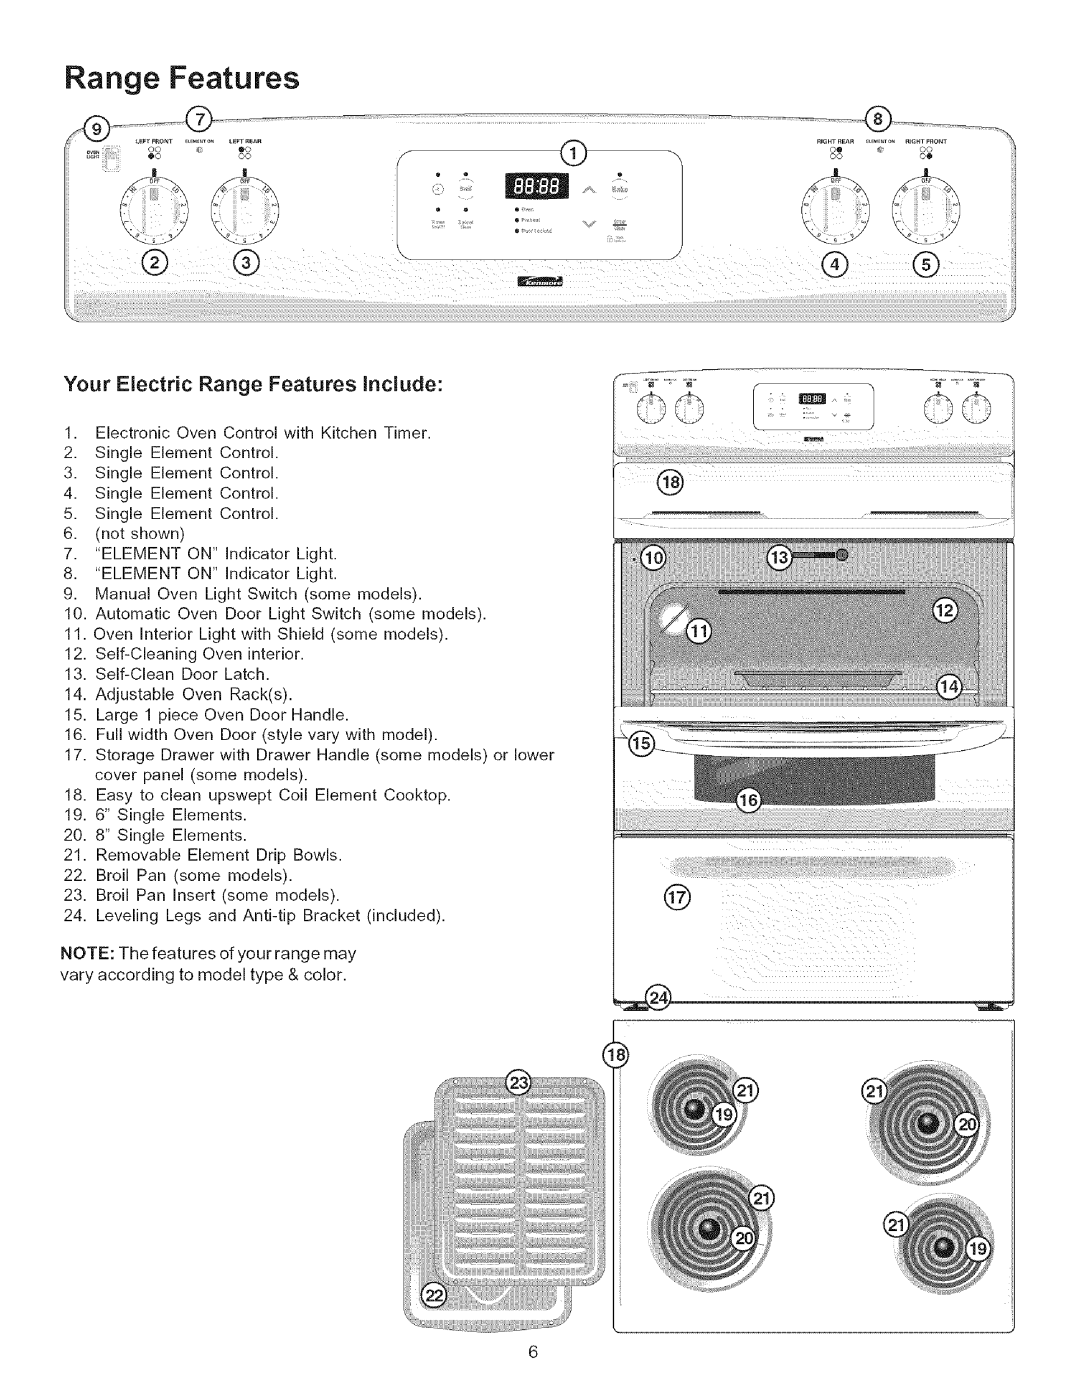 Kenmore 9412*, 9400*, 9410*, 9411*, 790.9090*, 9091*, 9413* manual @ /i ¸¸, Your Electric Range Features Include 